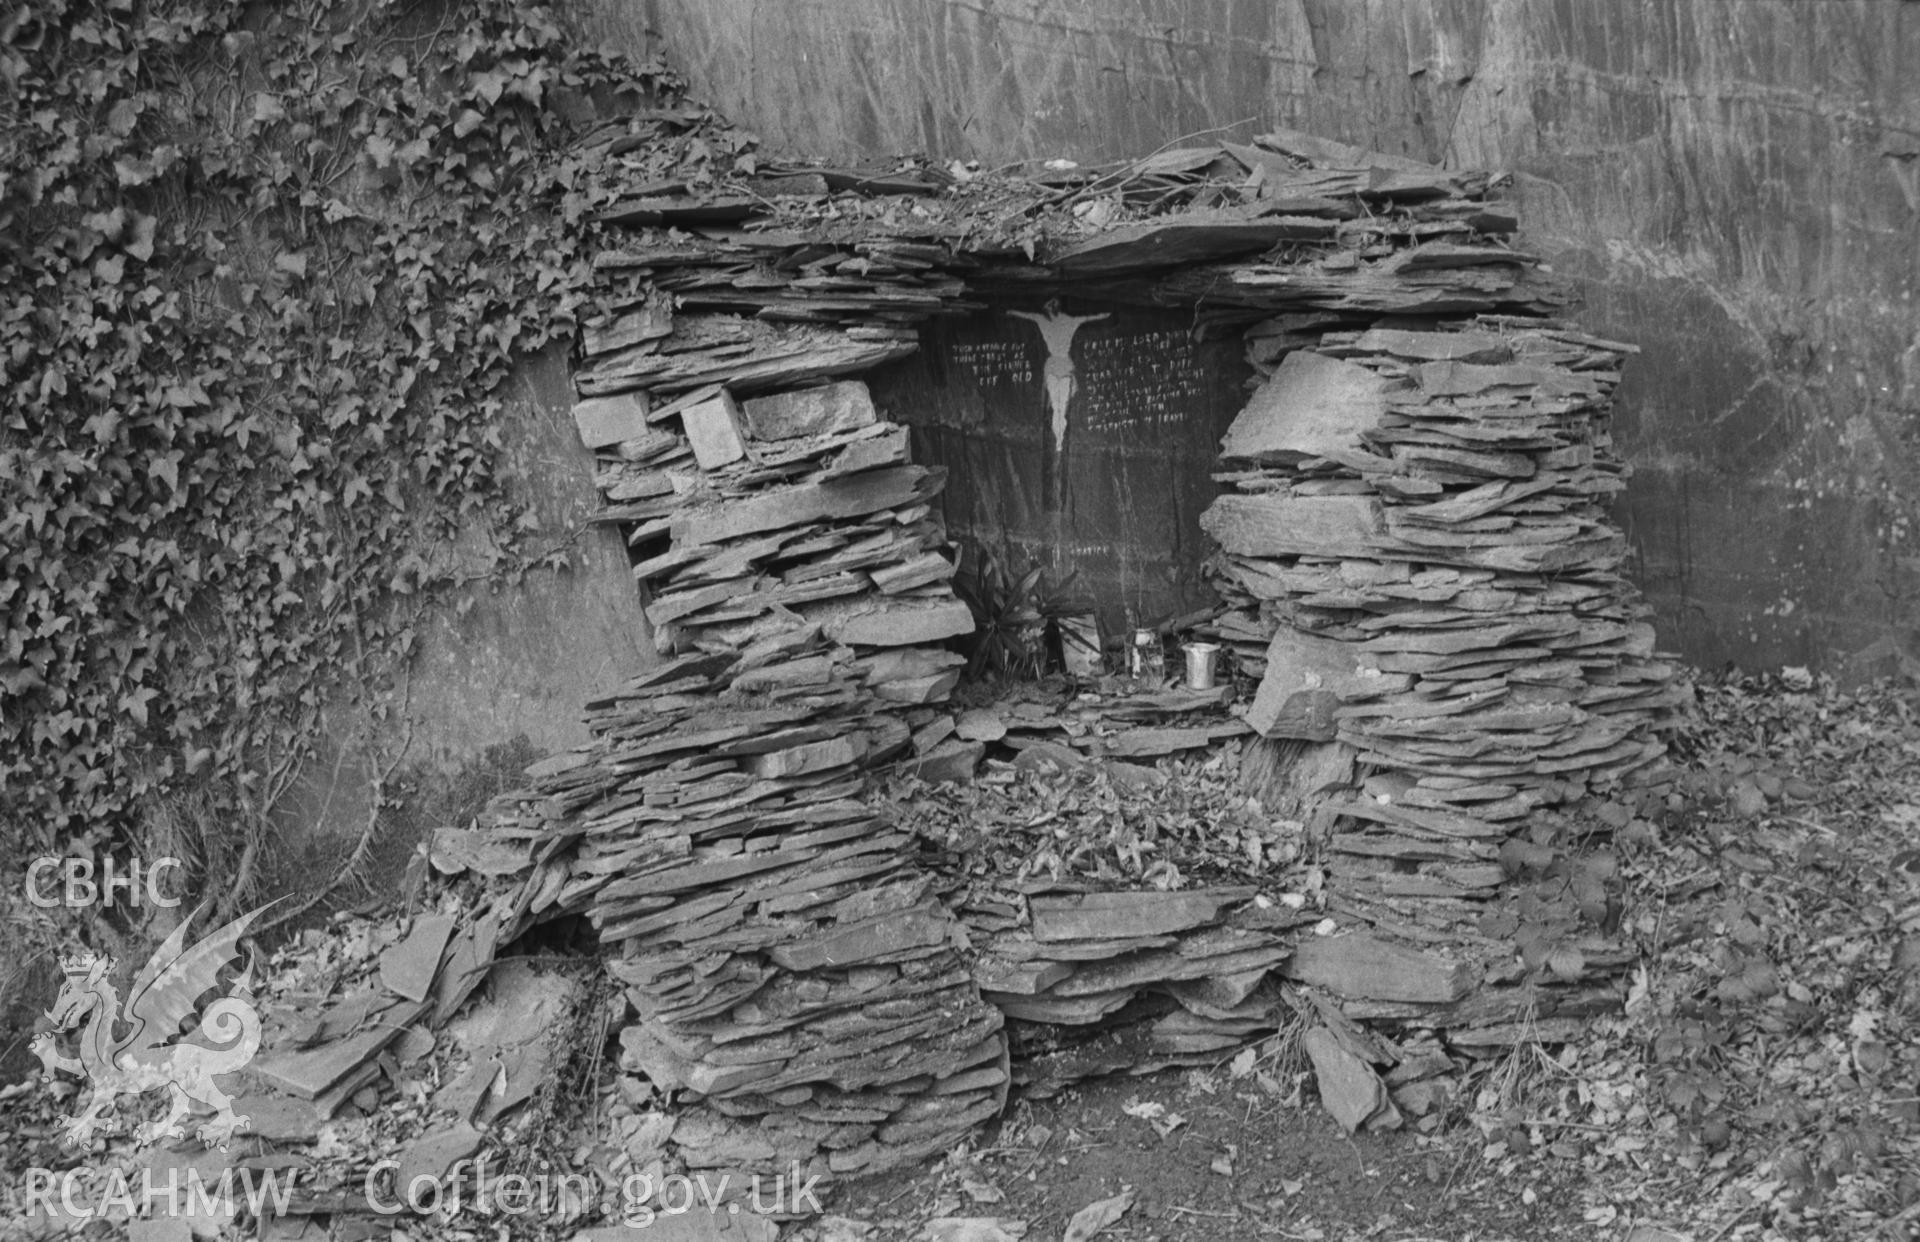 Digital copy of a black and white negative showing shrine to 'Paddy Duffy' Machynlleth. Exact location unknown. Photographed in April 1964 by Arthur O. Chater.